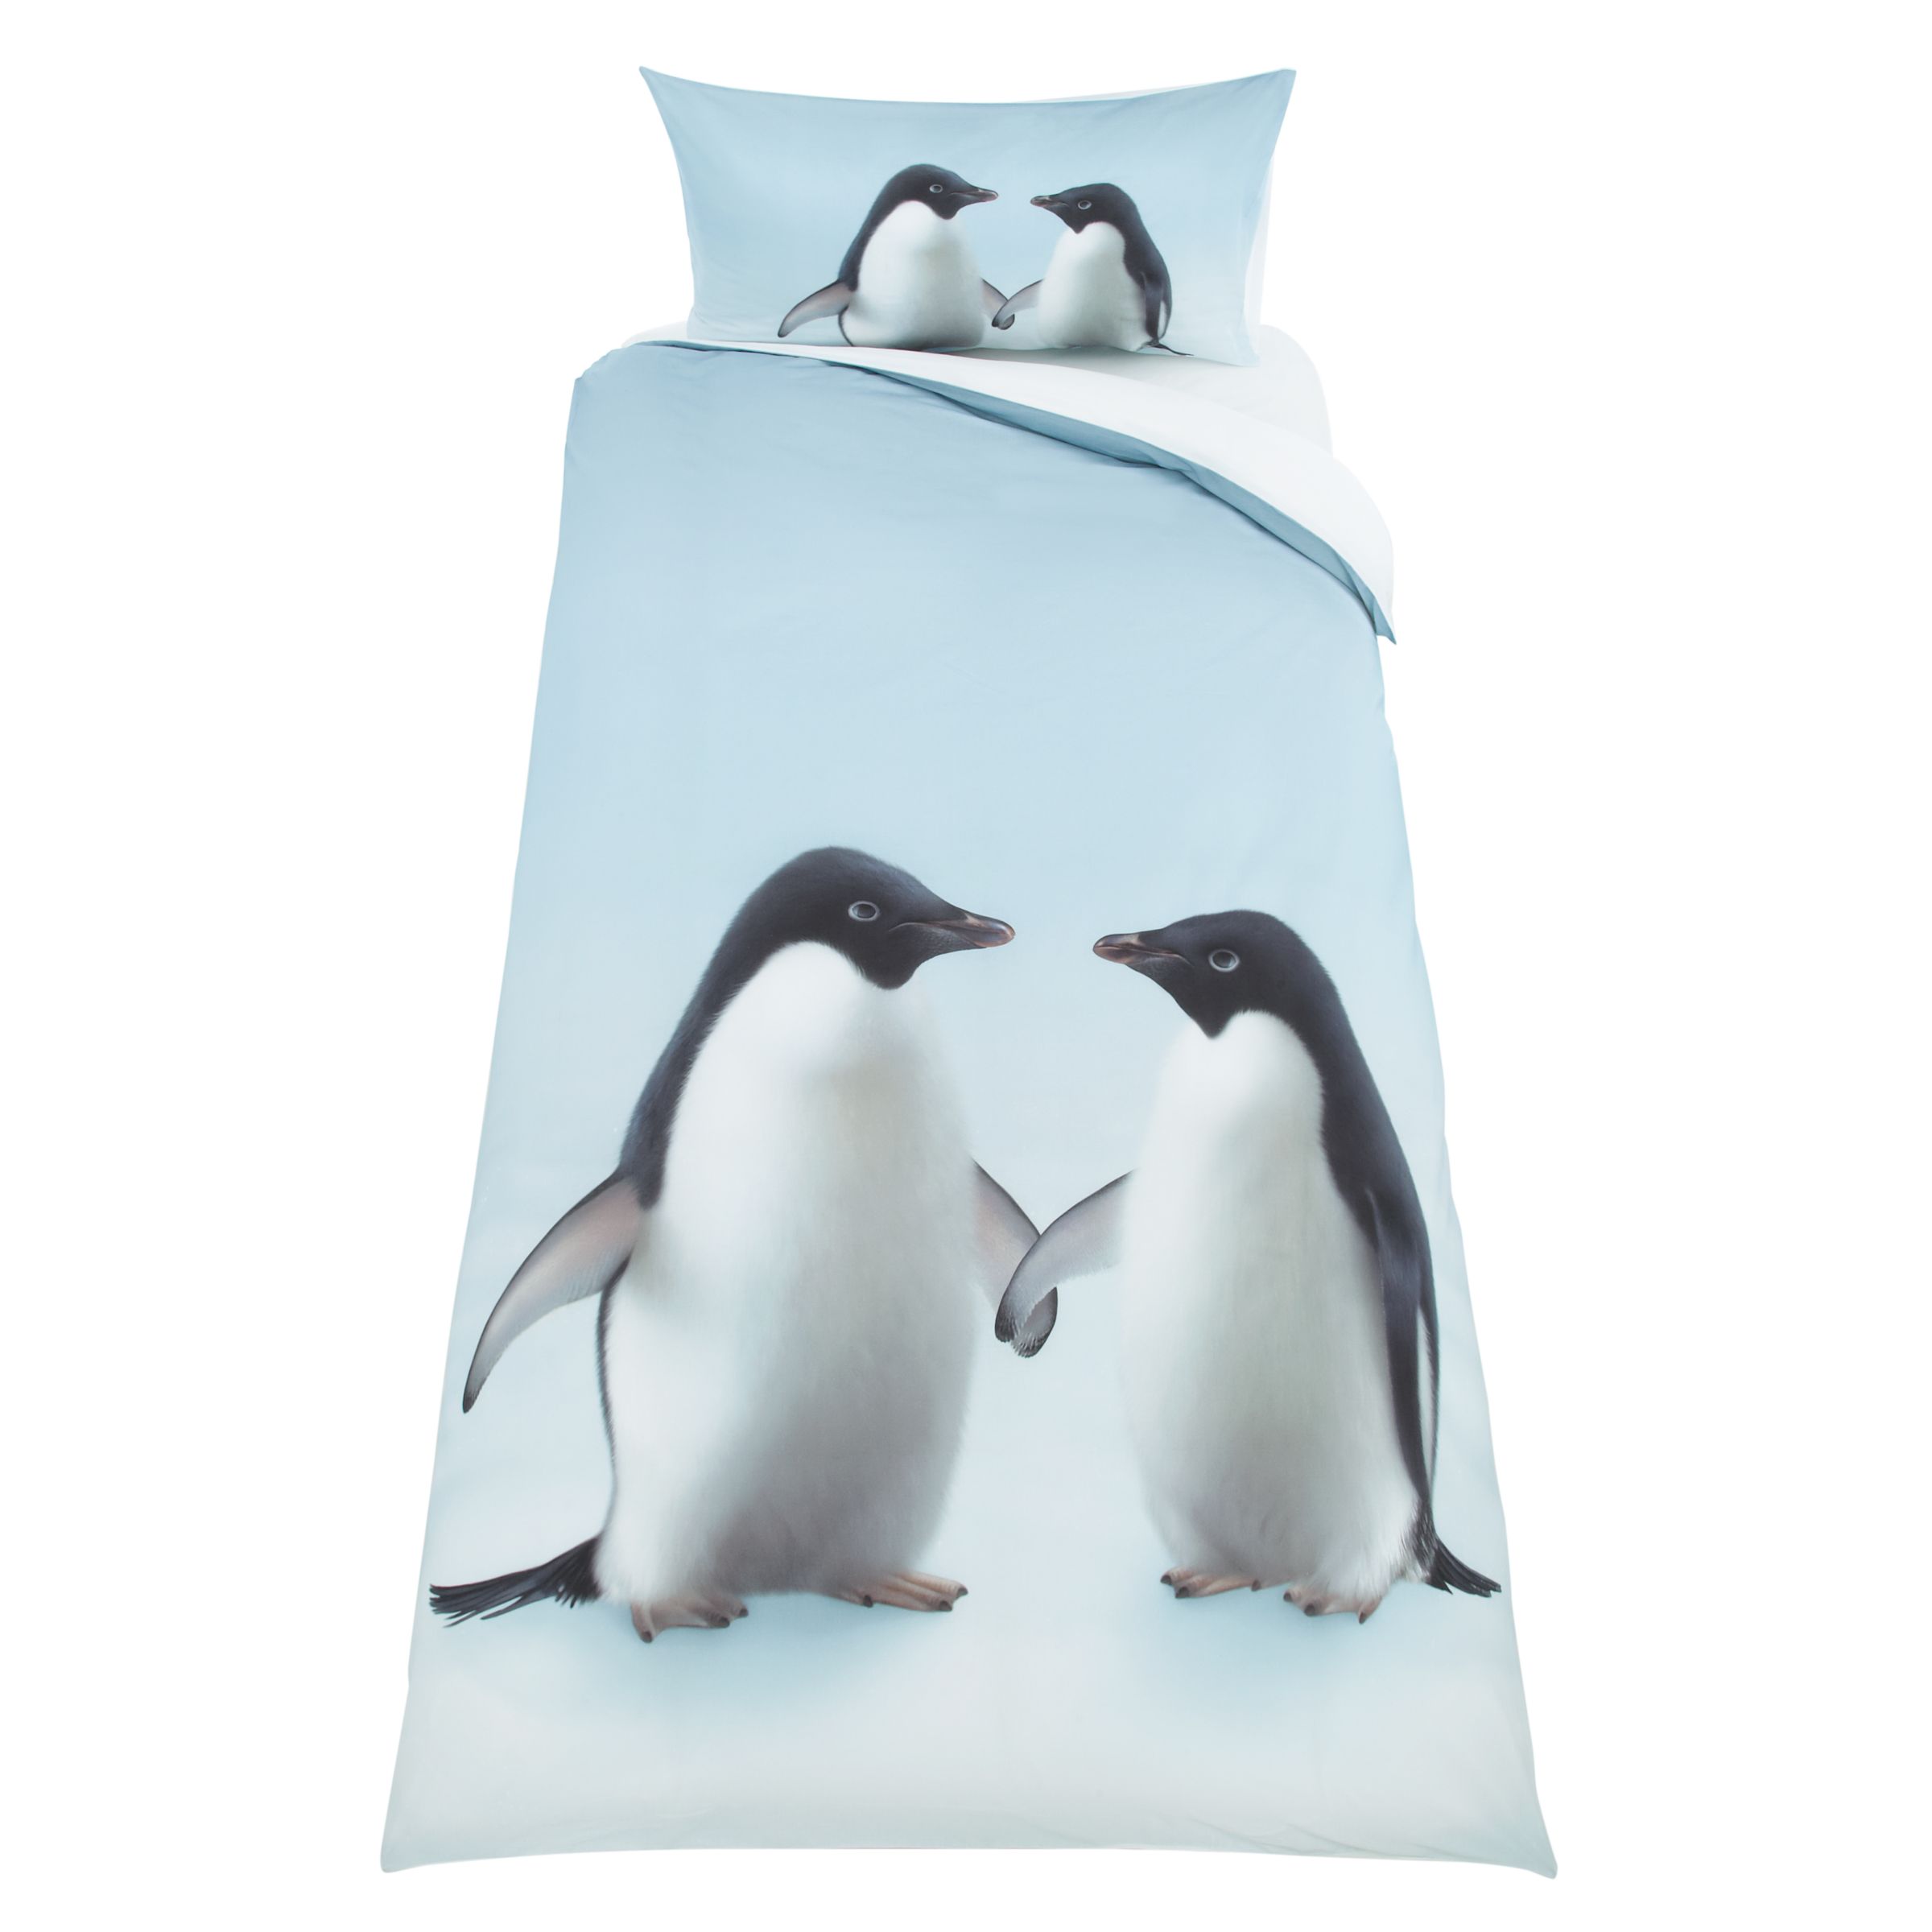 Little Home At John Lewis Monty Mabel Single Duvet Cover And